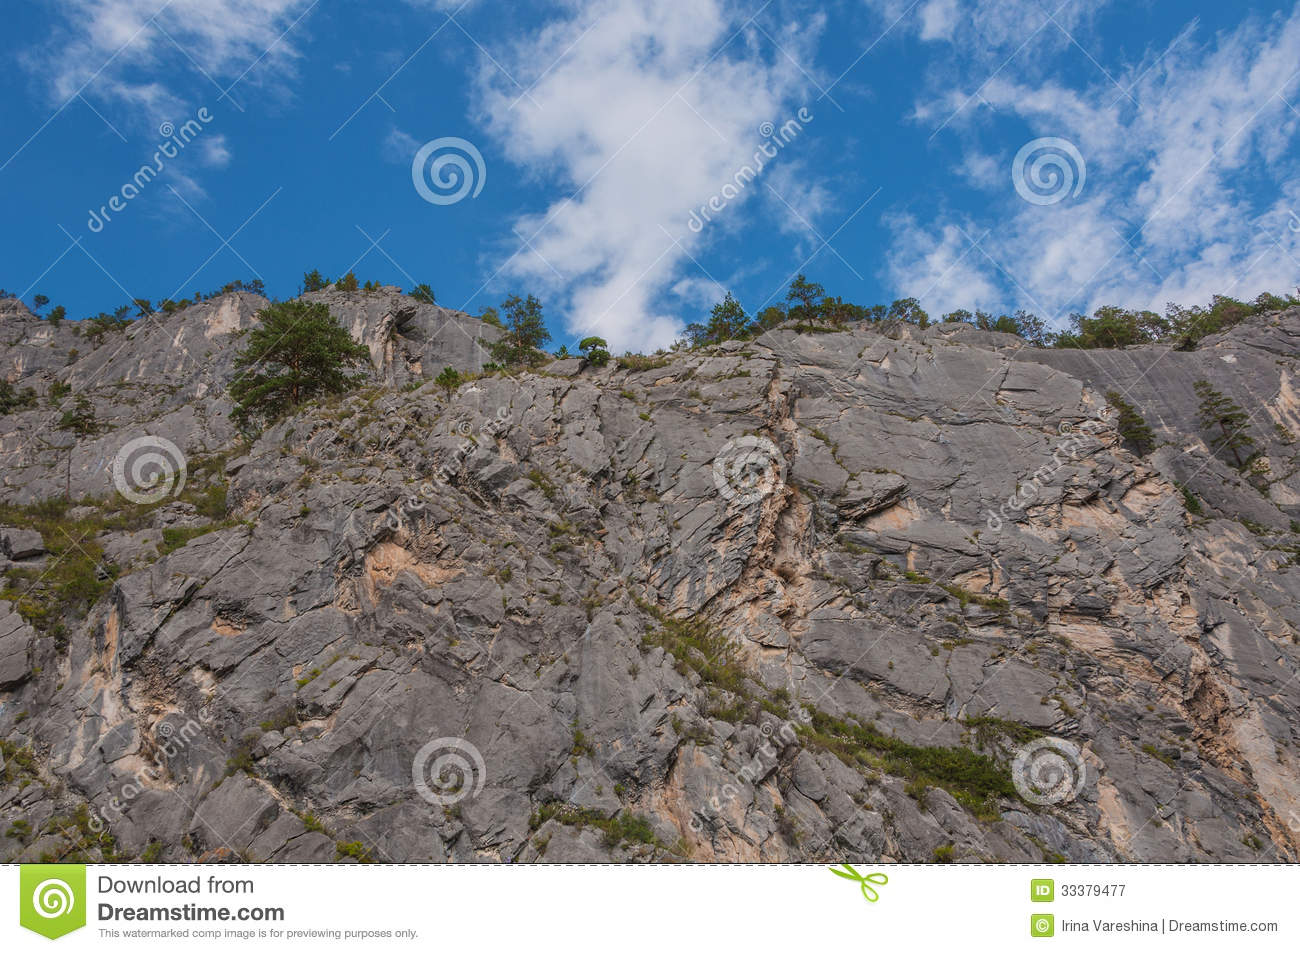 Steep Cliffs Trees Top Rocks Royalty Free Stock Photography   Image